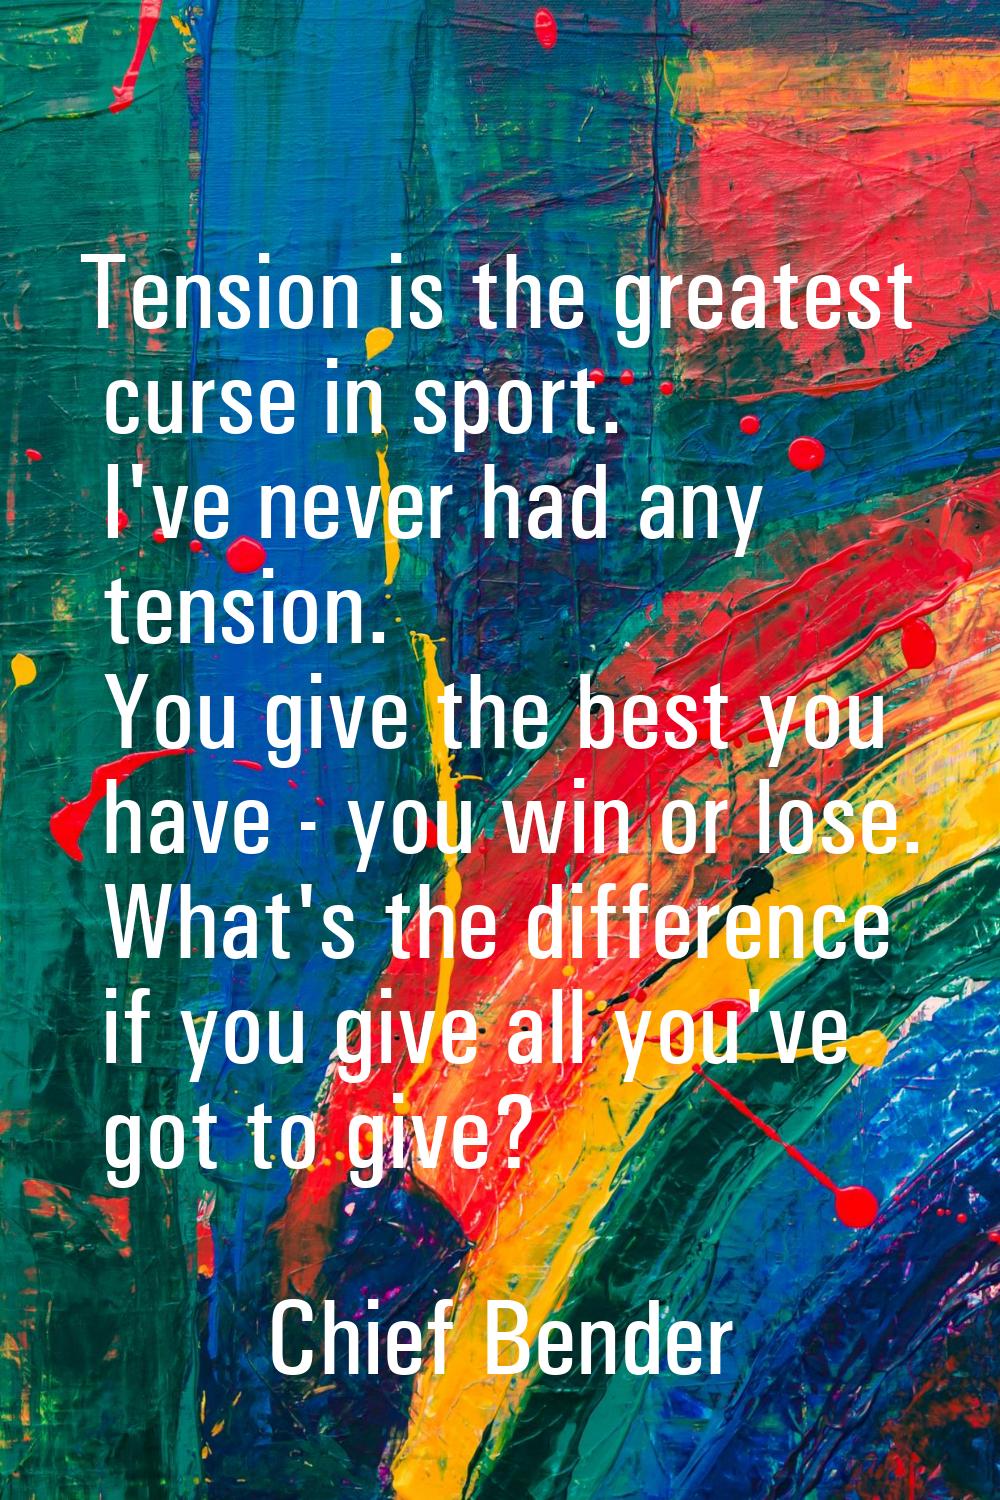 Tension is the greatest curse in sport. I've never had any tension. You give the best you have - yo